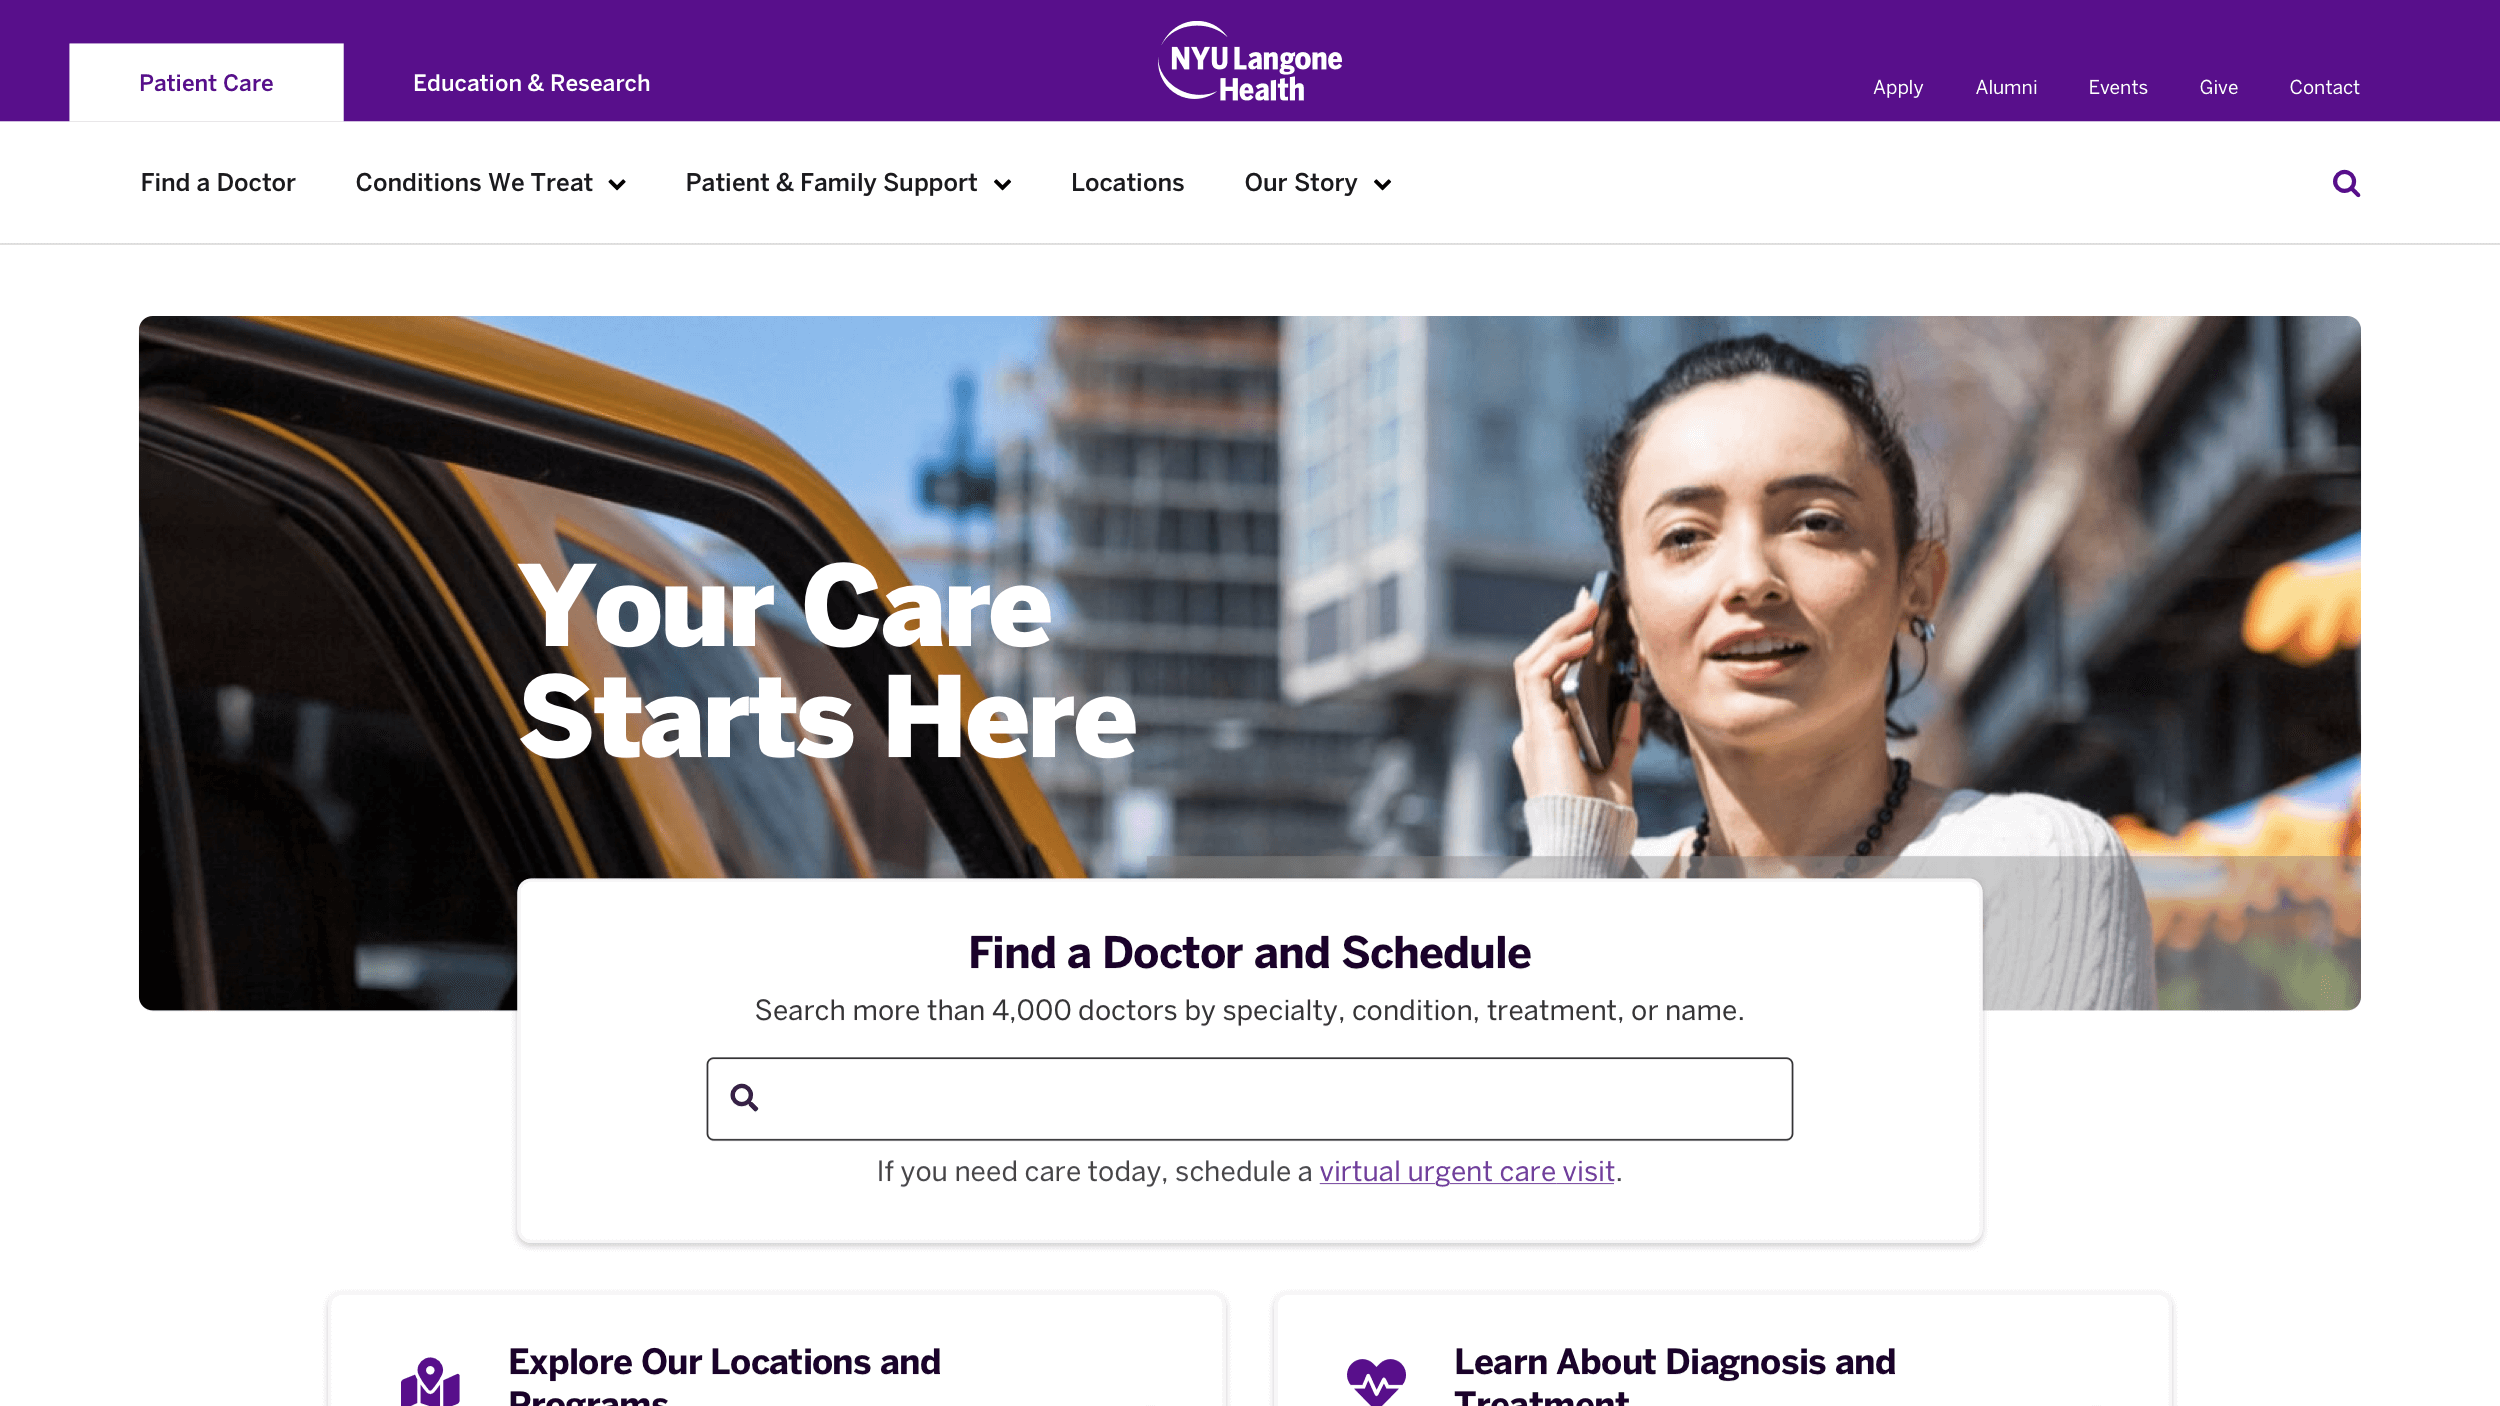 Patient Care at NYU Langone Health